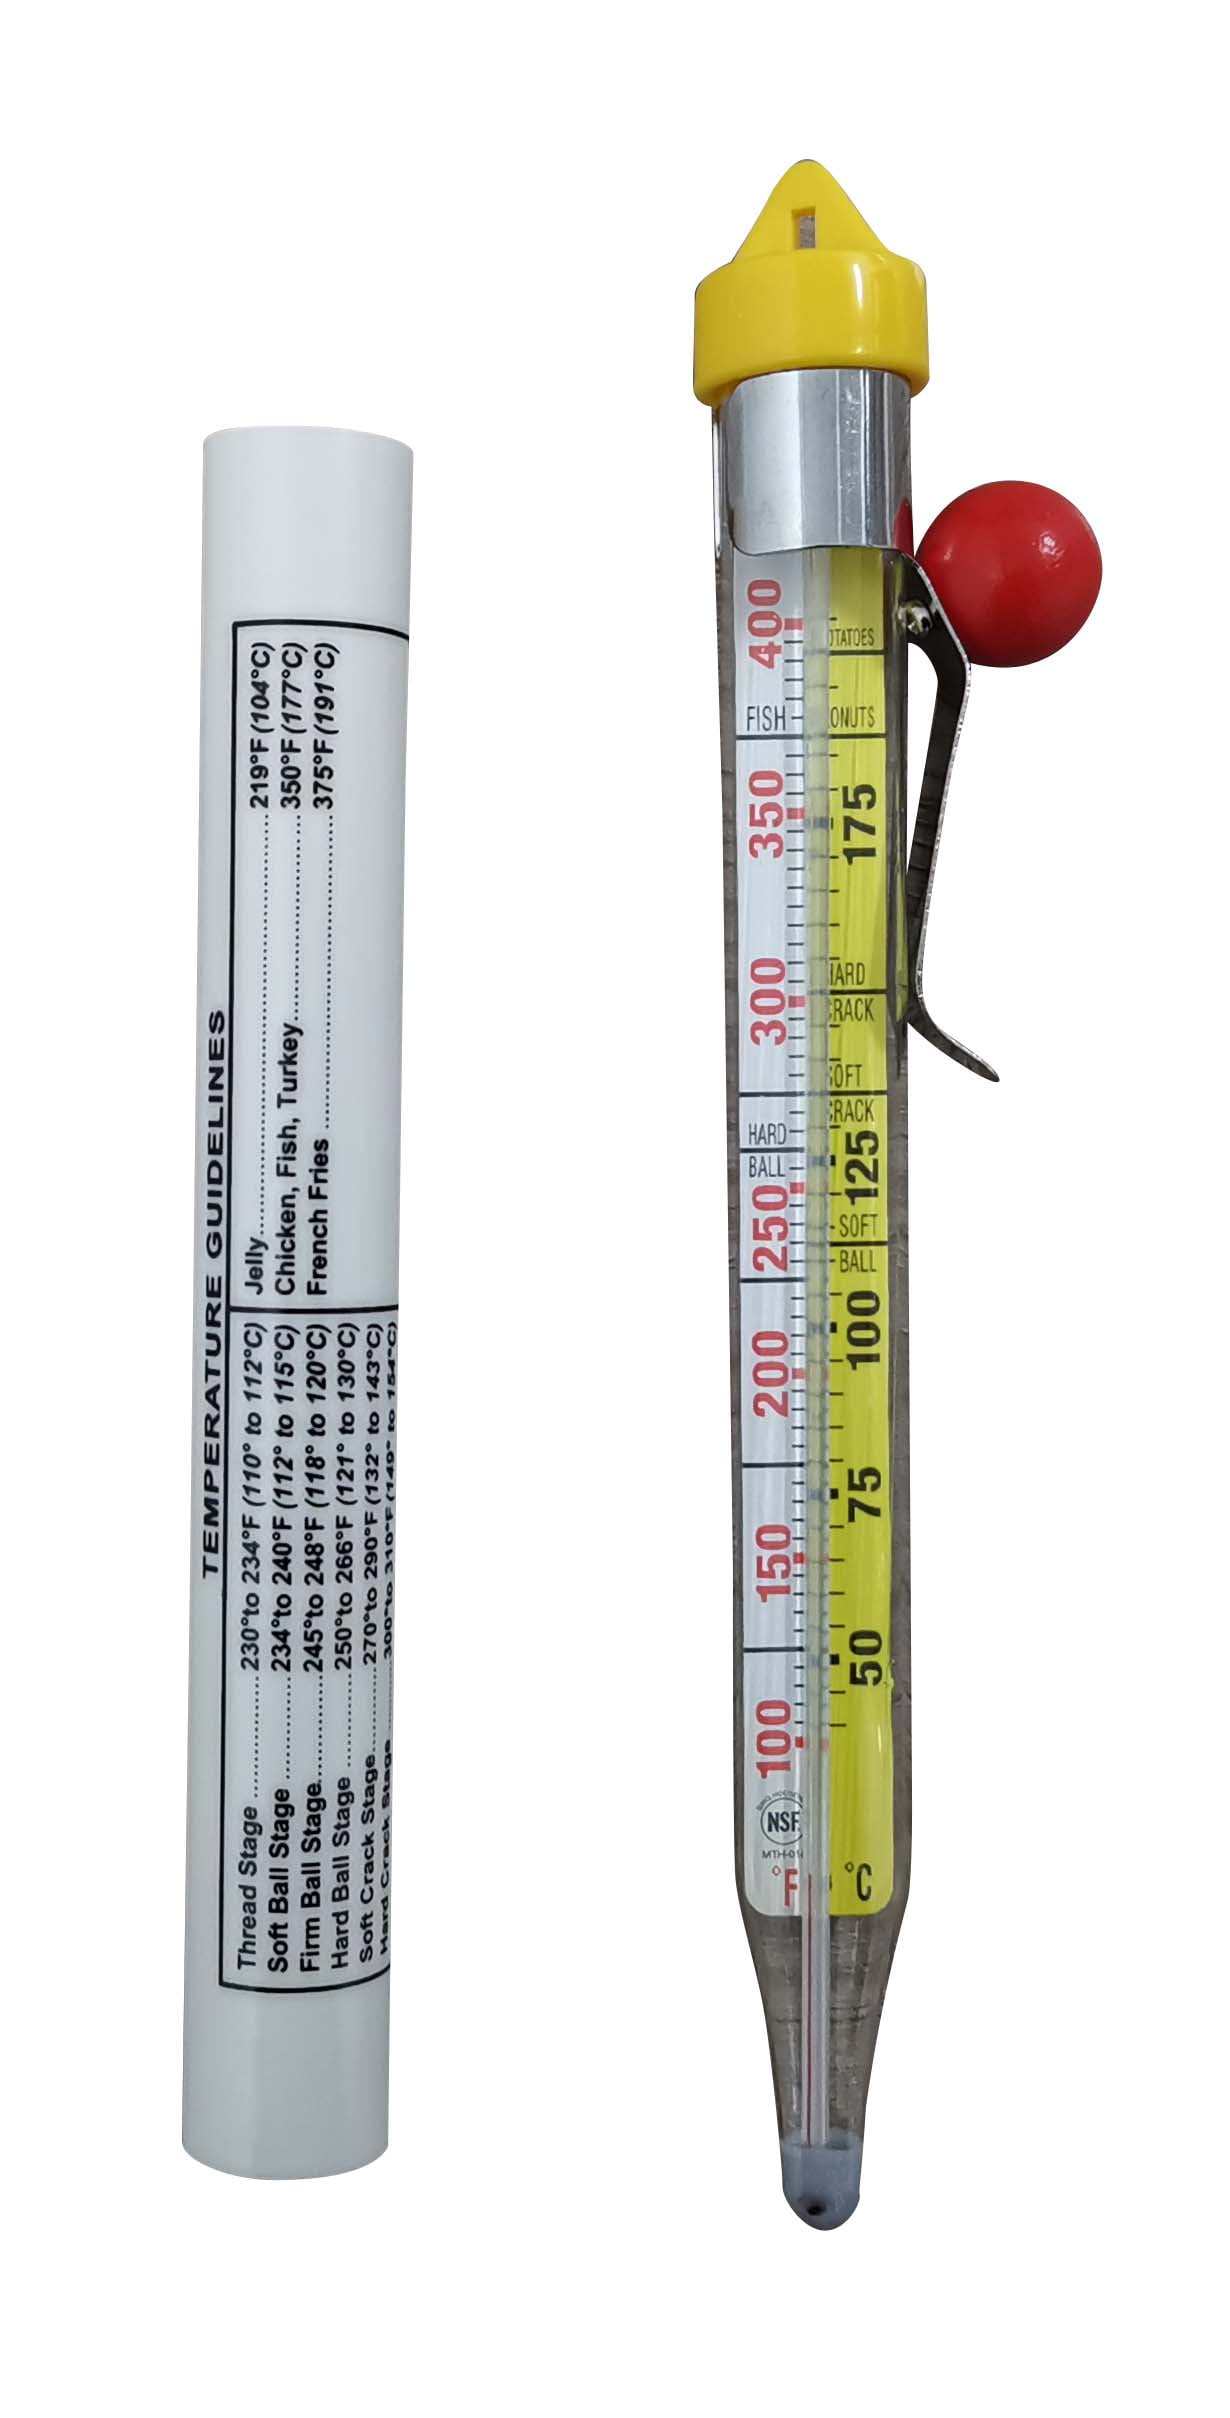 Mainstays Candy Thermometer, Clip Attachment with Easy to Read Red and Black Numbers bold display